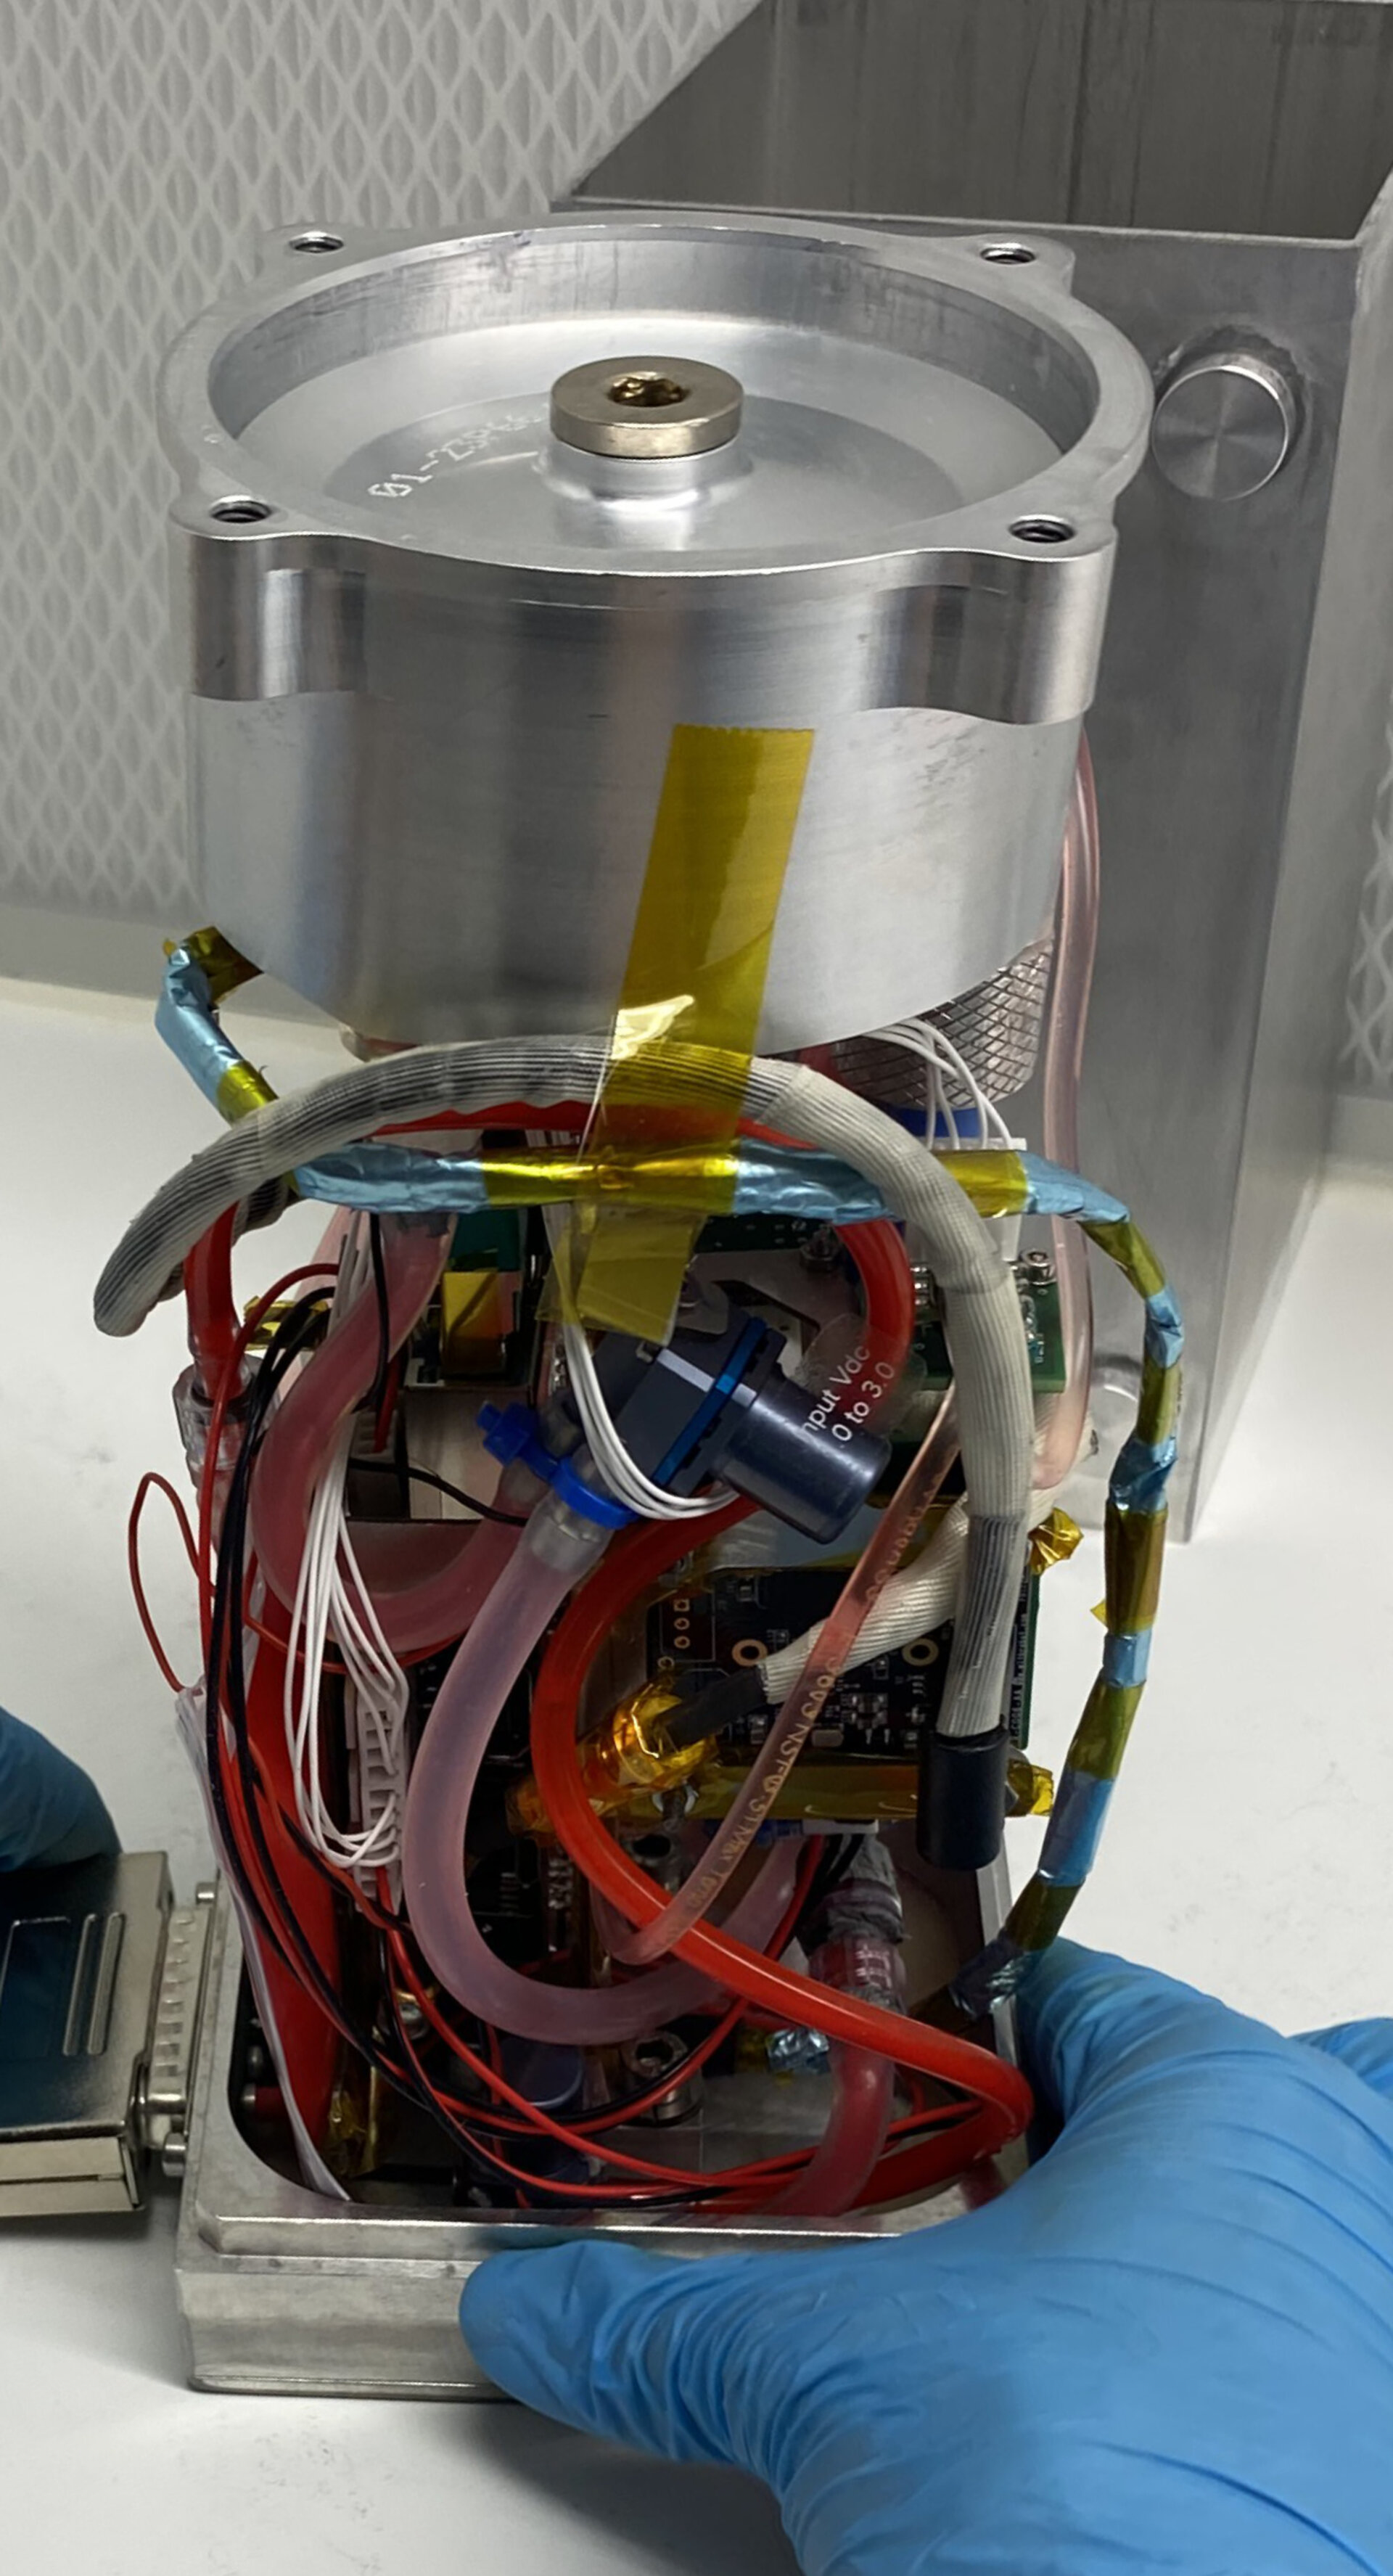 Inside the Artery in Microgravity experiment is an intricate network of fluidic tubes